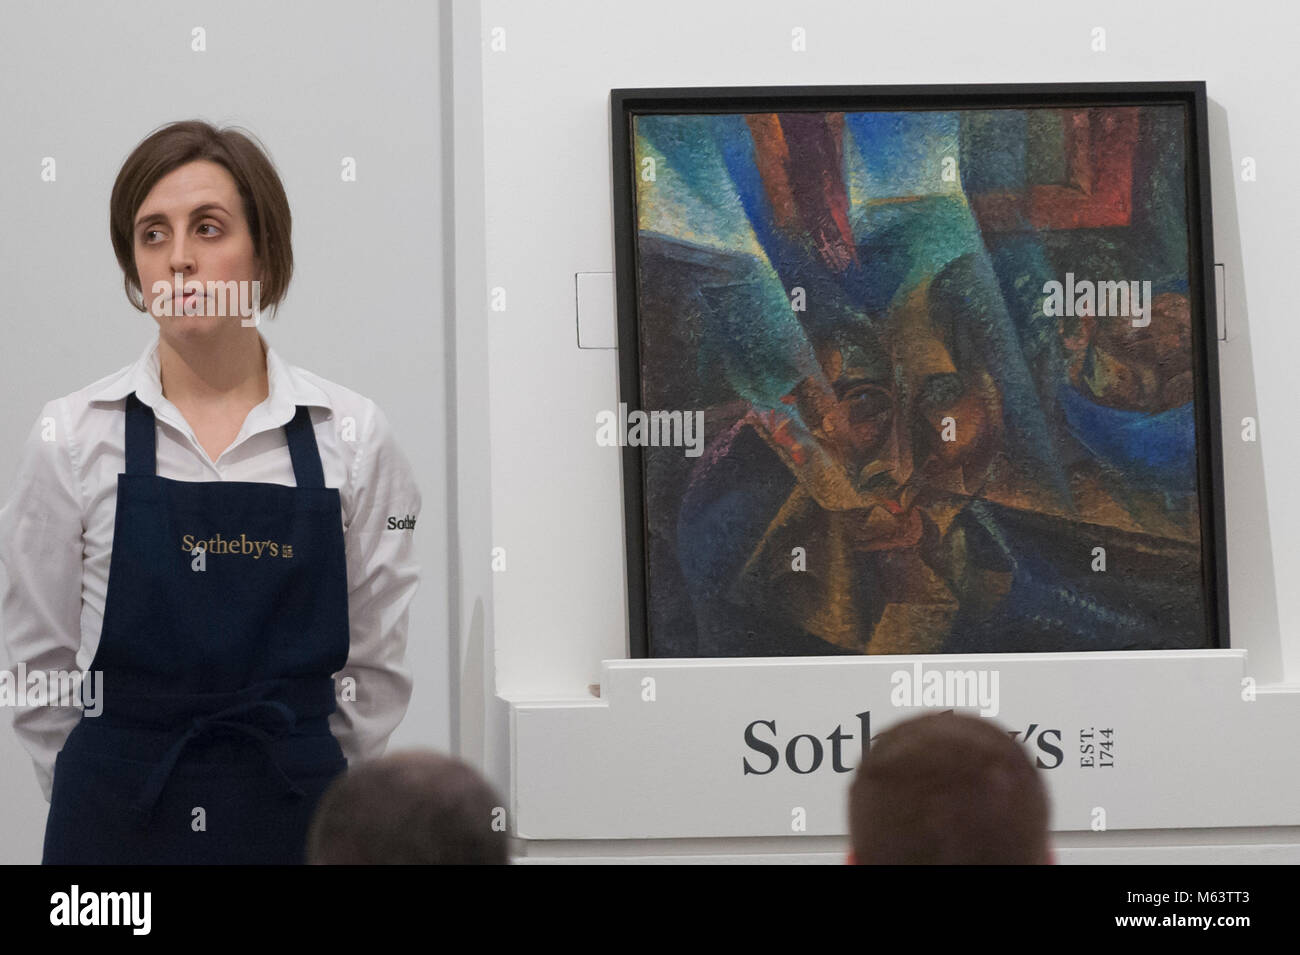 London, UK.  28 February 2018. ''Testa + Luce + Ambiente'' by Umberto Boccioni, (Est. £5.5-7.5m) sold for a hammer price of £7.9m at the evening sale of Impressionist, Modern & Surrealist art at Sotheby's in New Bond Street.  Credit: Stephen Chung / Alamy Live News Stock Photo